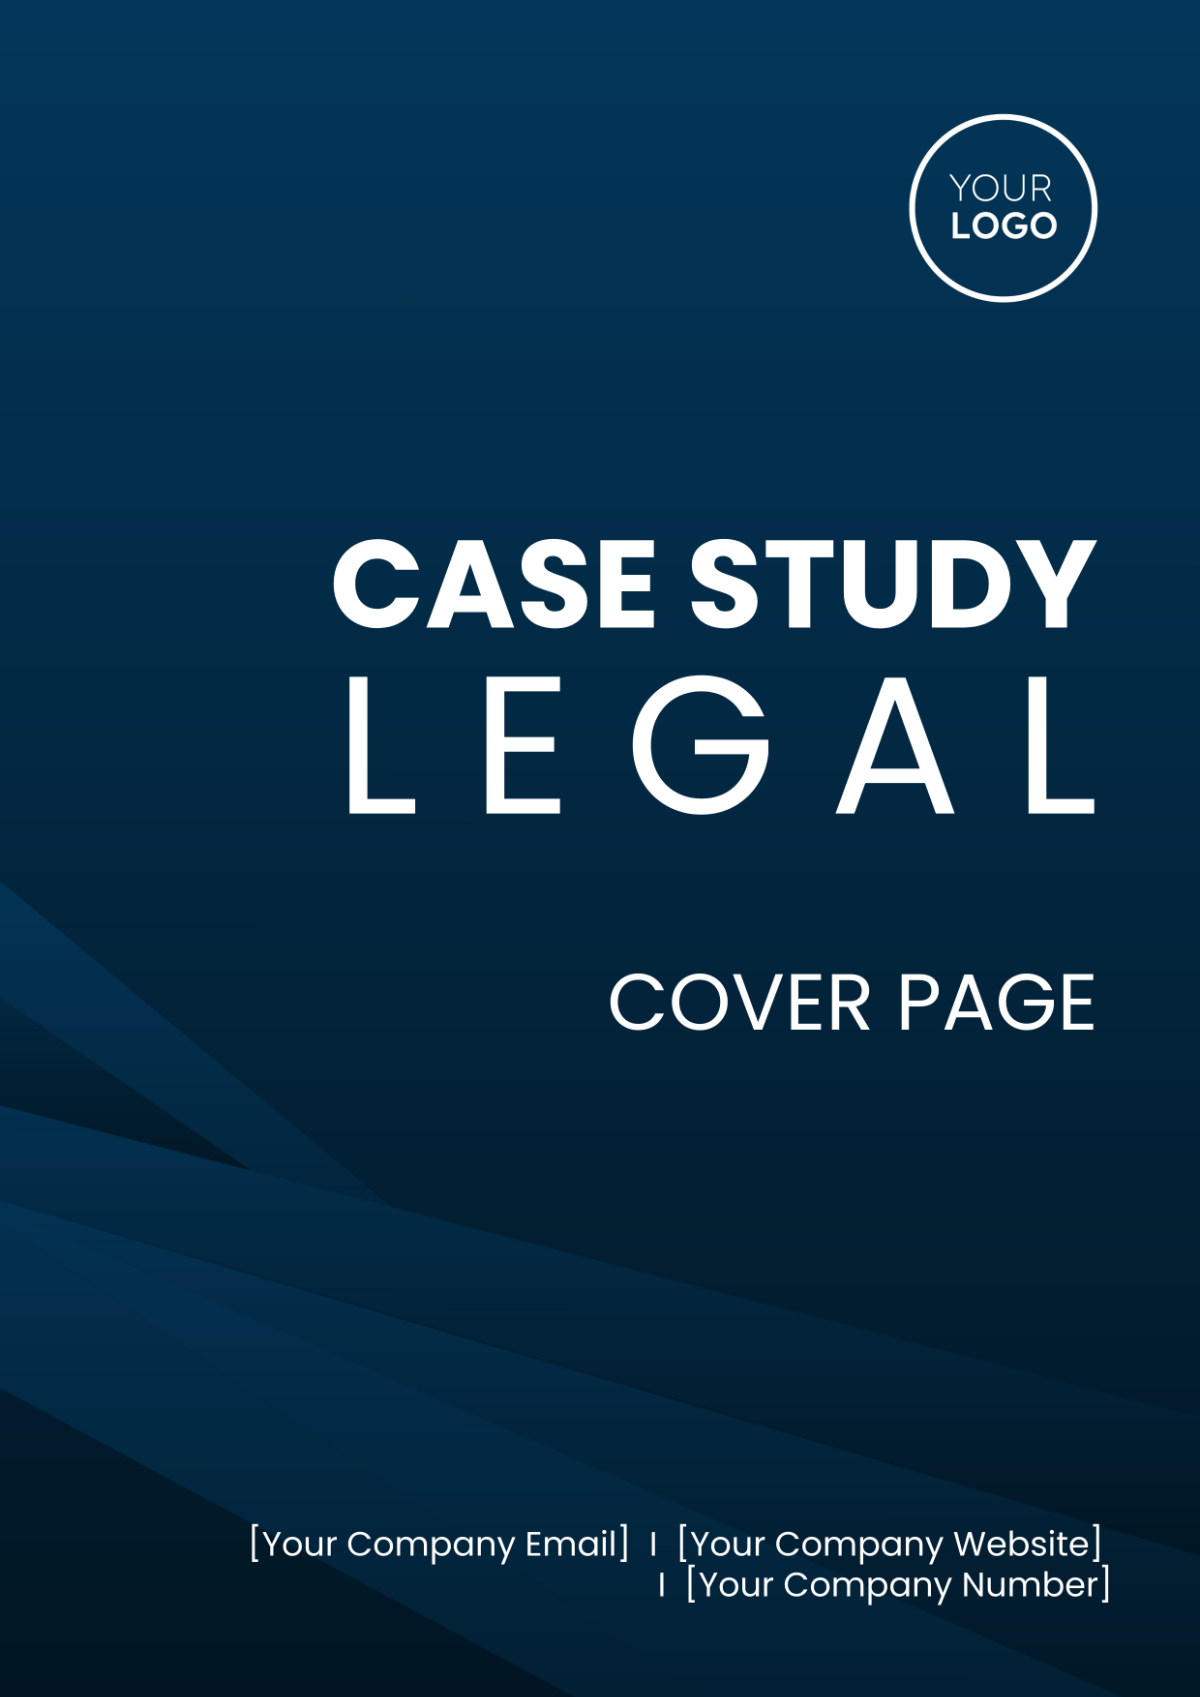 Case Study Legal Cover Page